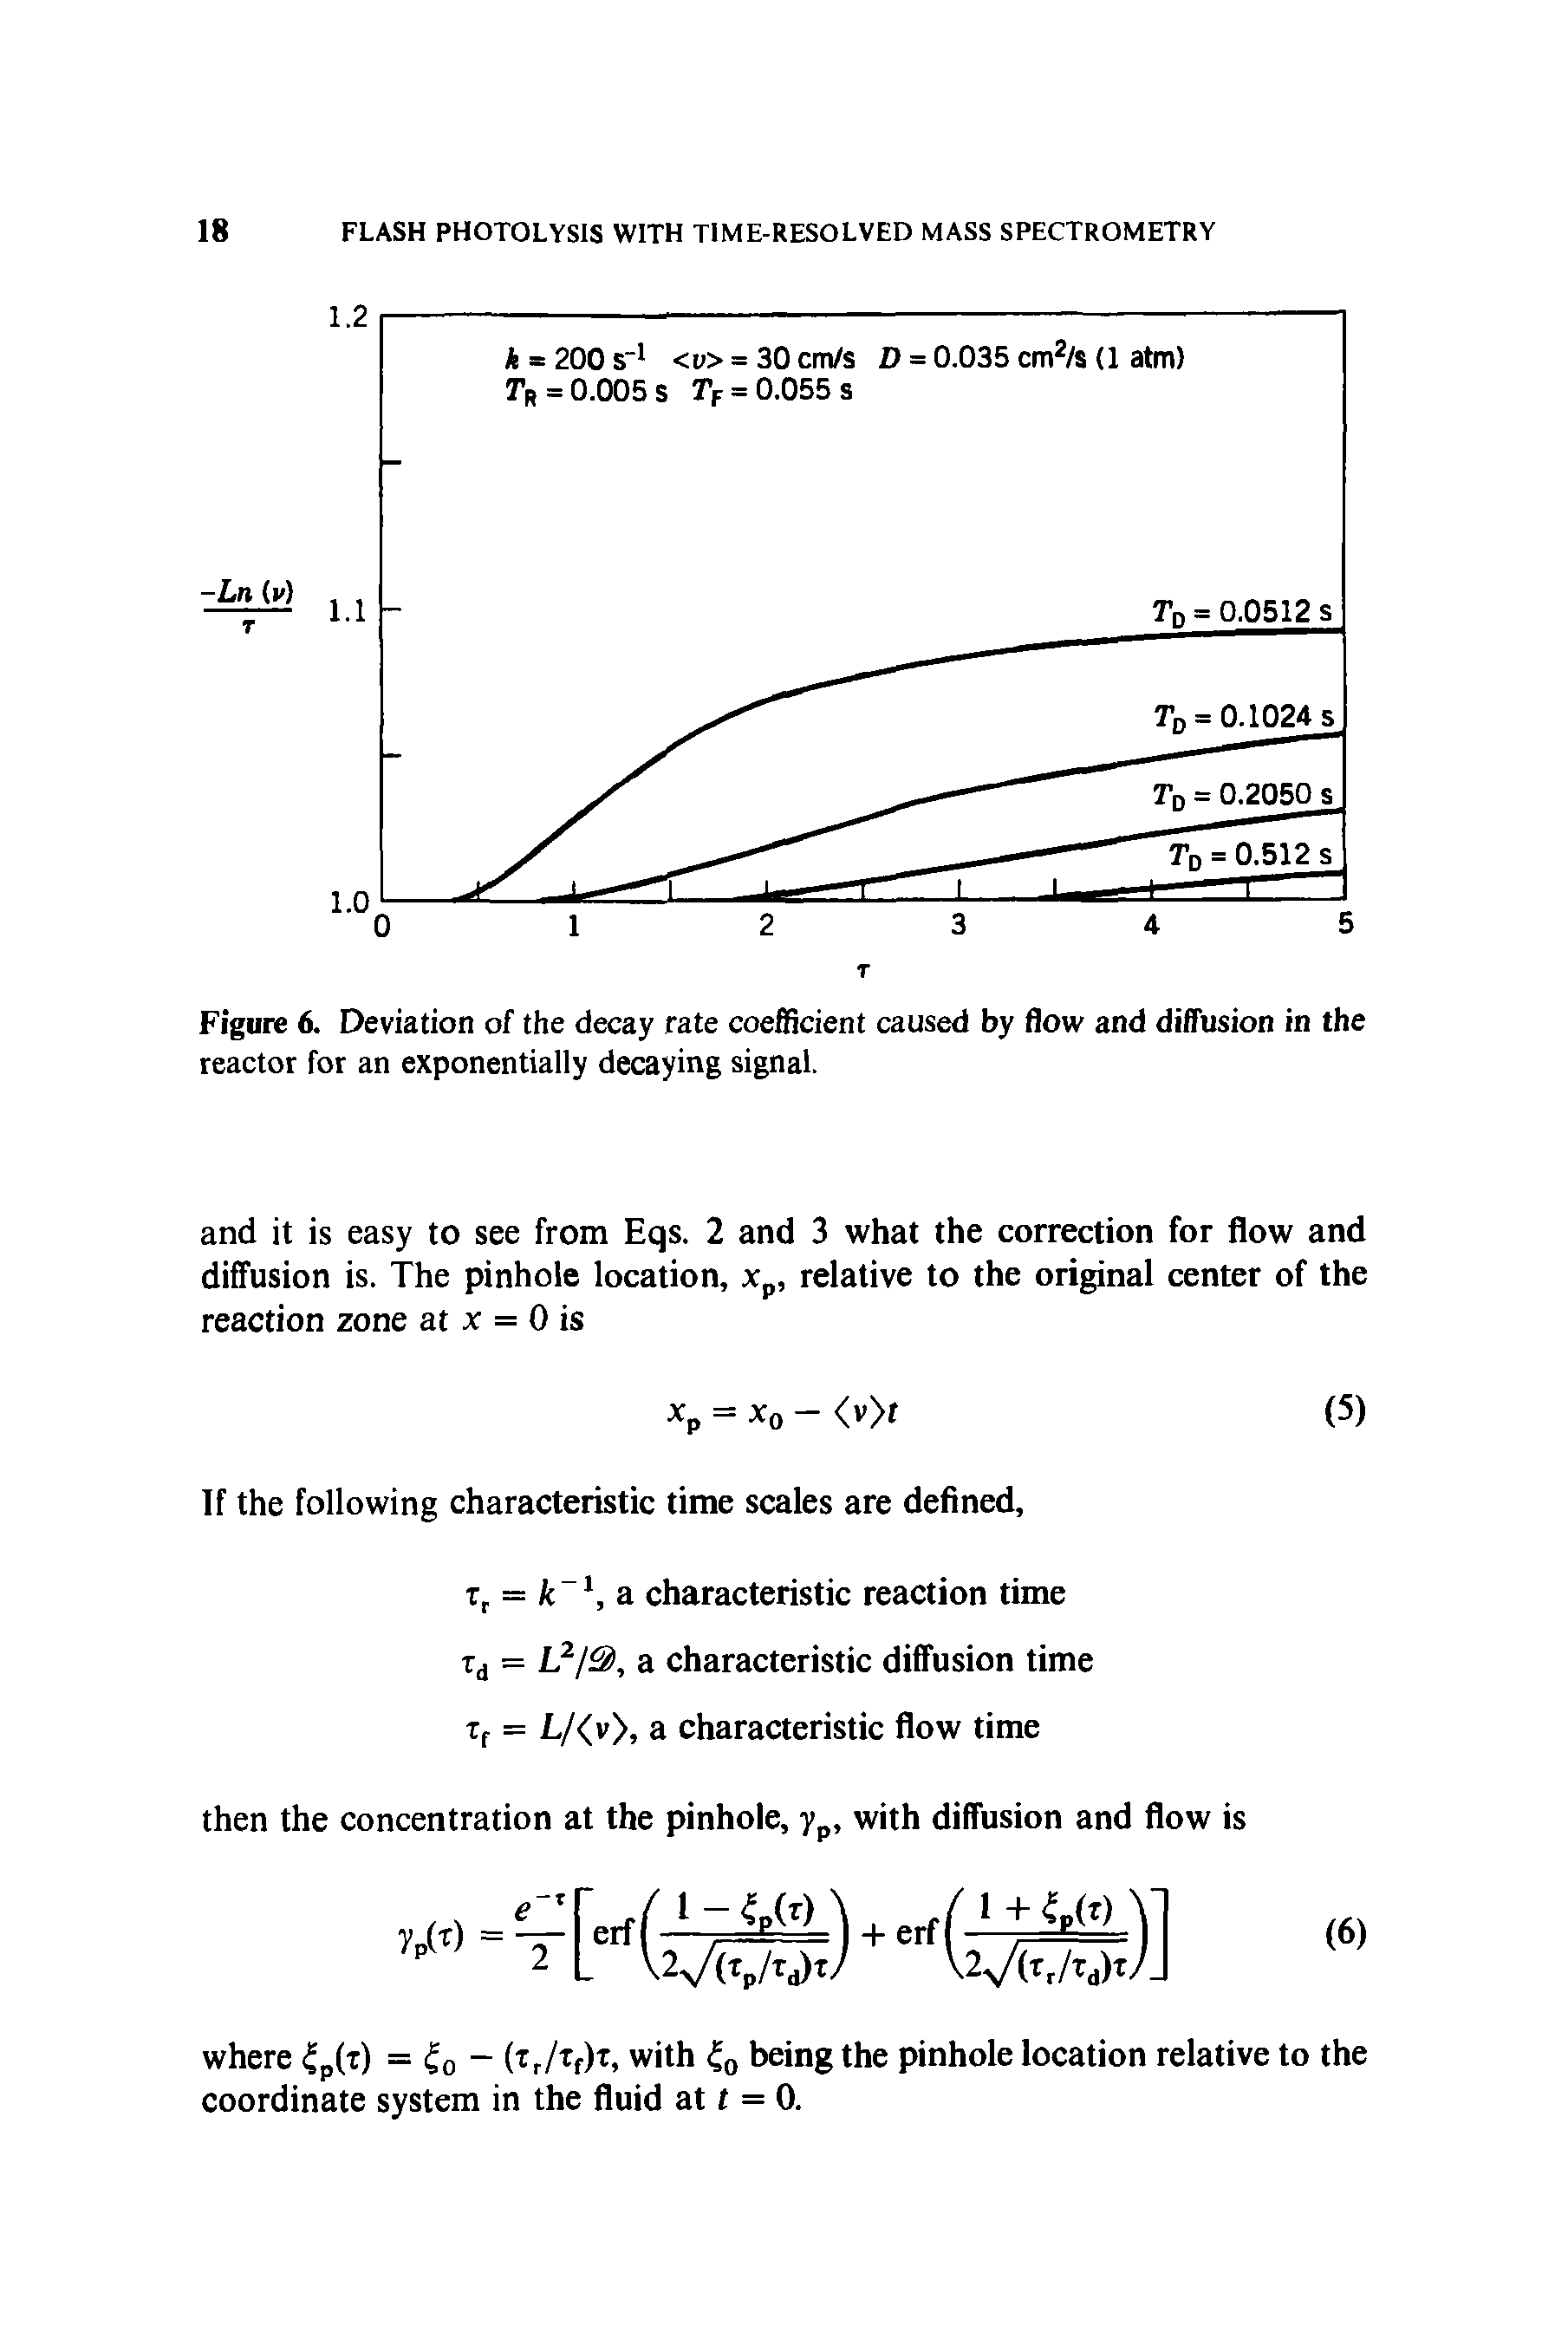 Figure 6. Deviation of the decay rate coefficient caused by flow and diffusion in the reactor for an exponentially decaying signal.